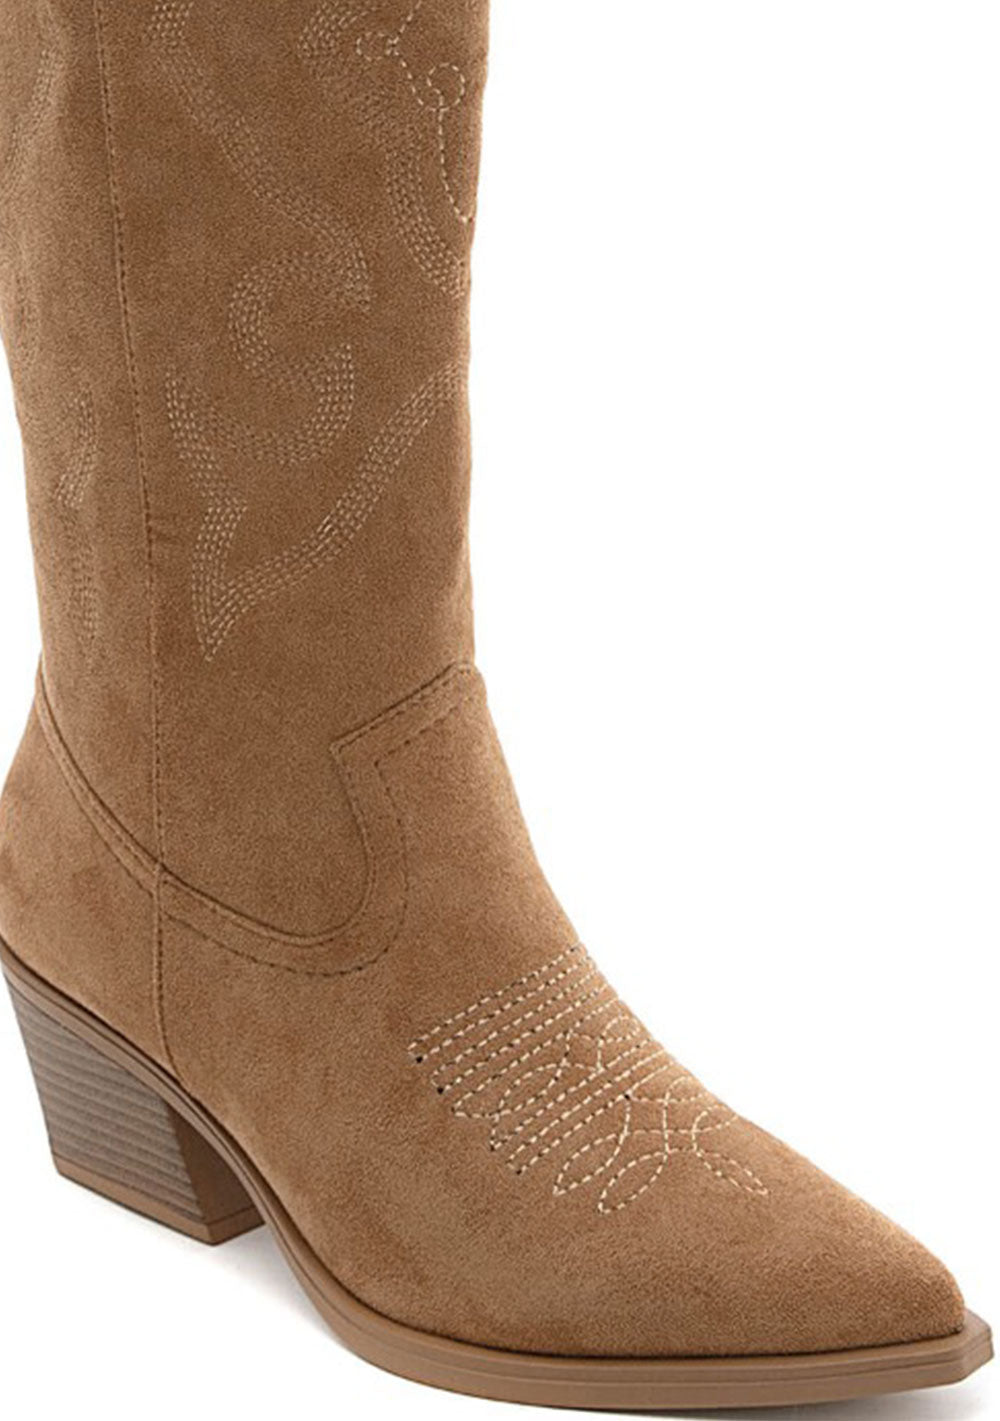 ♡ Hohe Westernboots